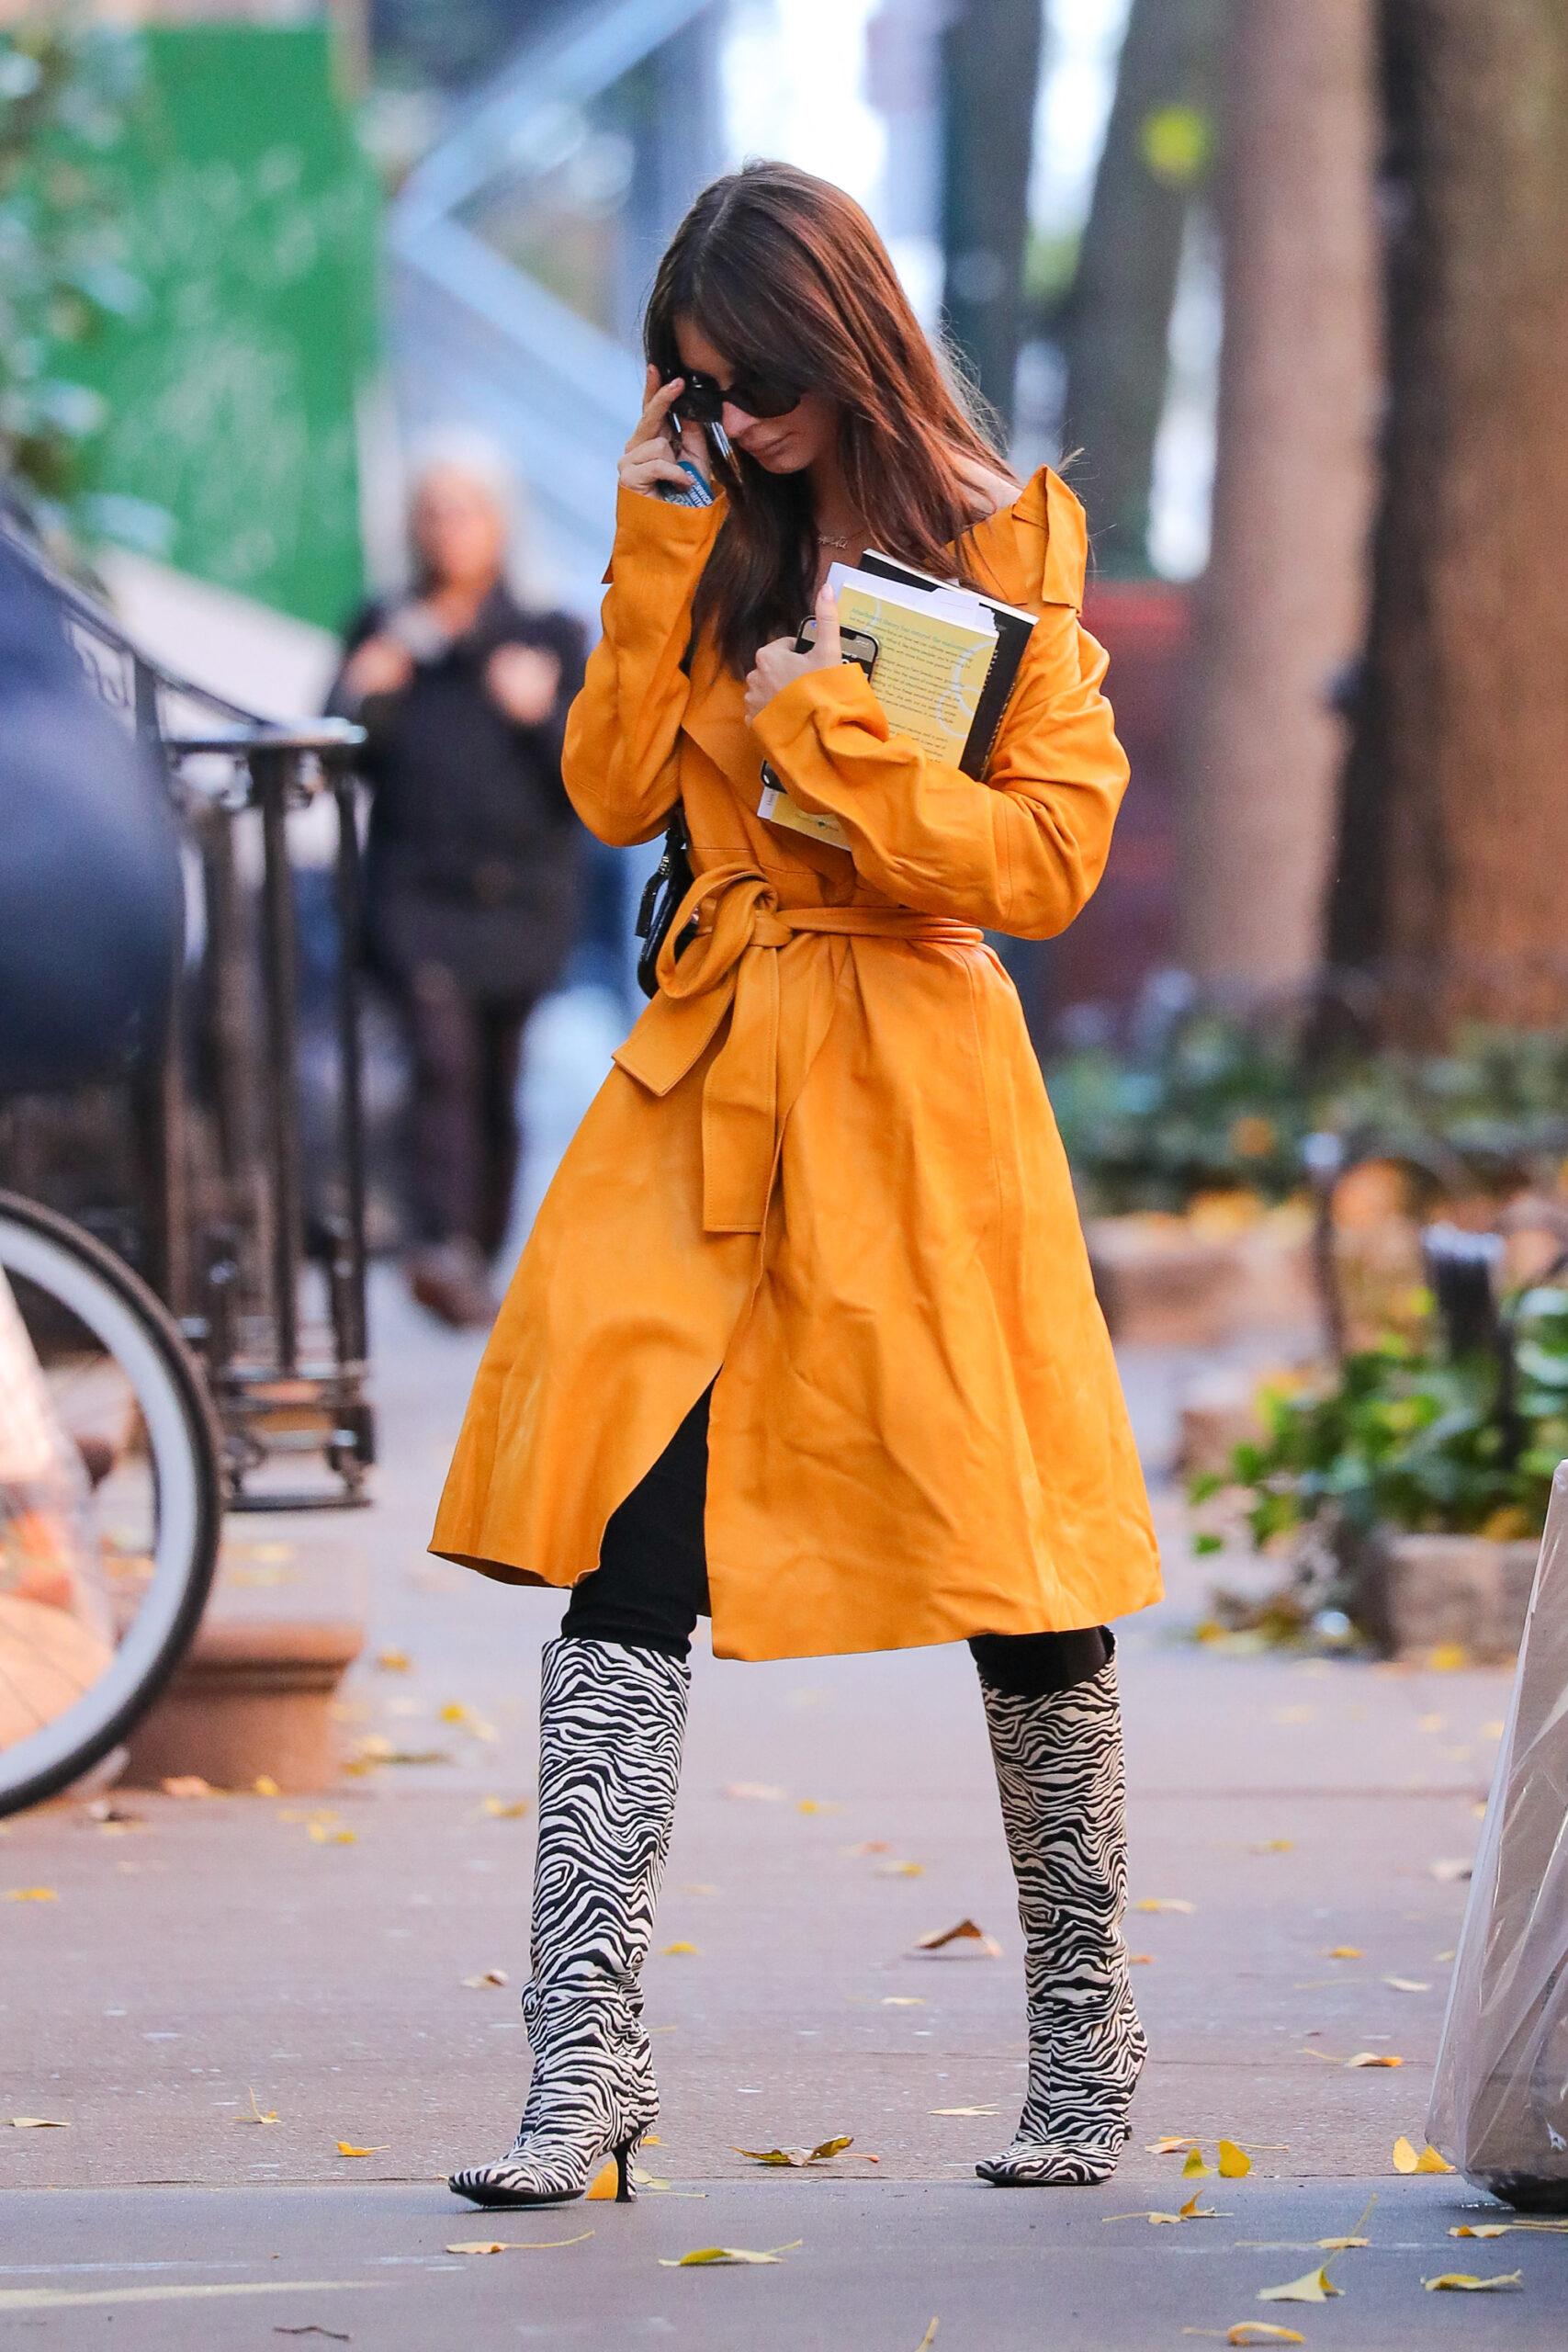 Emily Ratajkowski wears a yellow coat while out and about in New York City